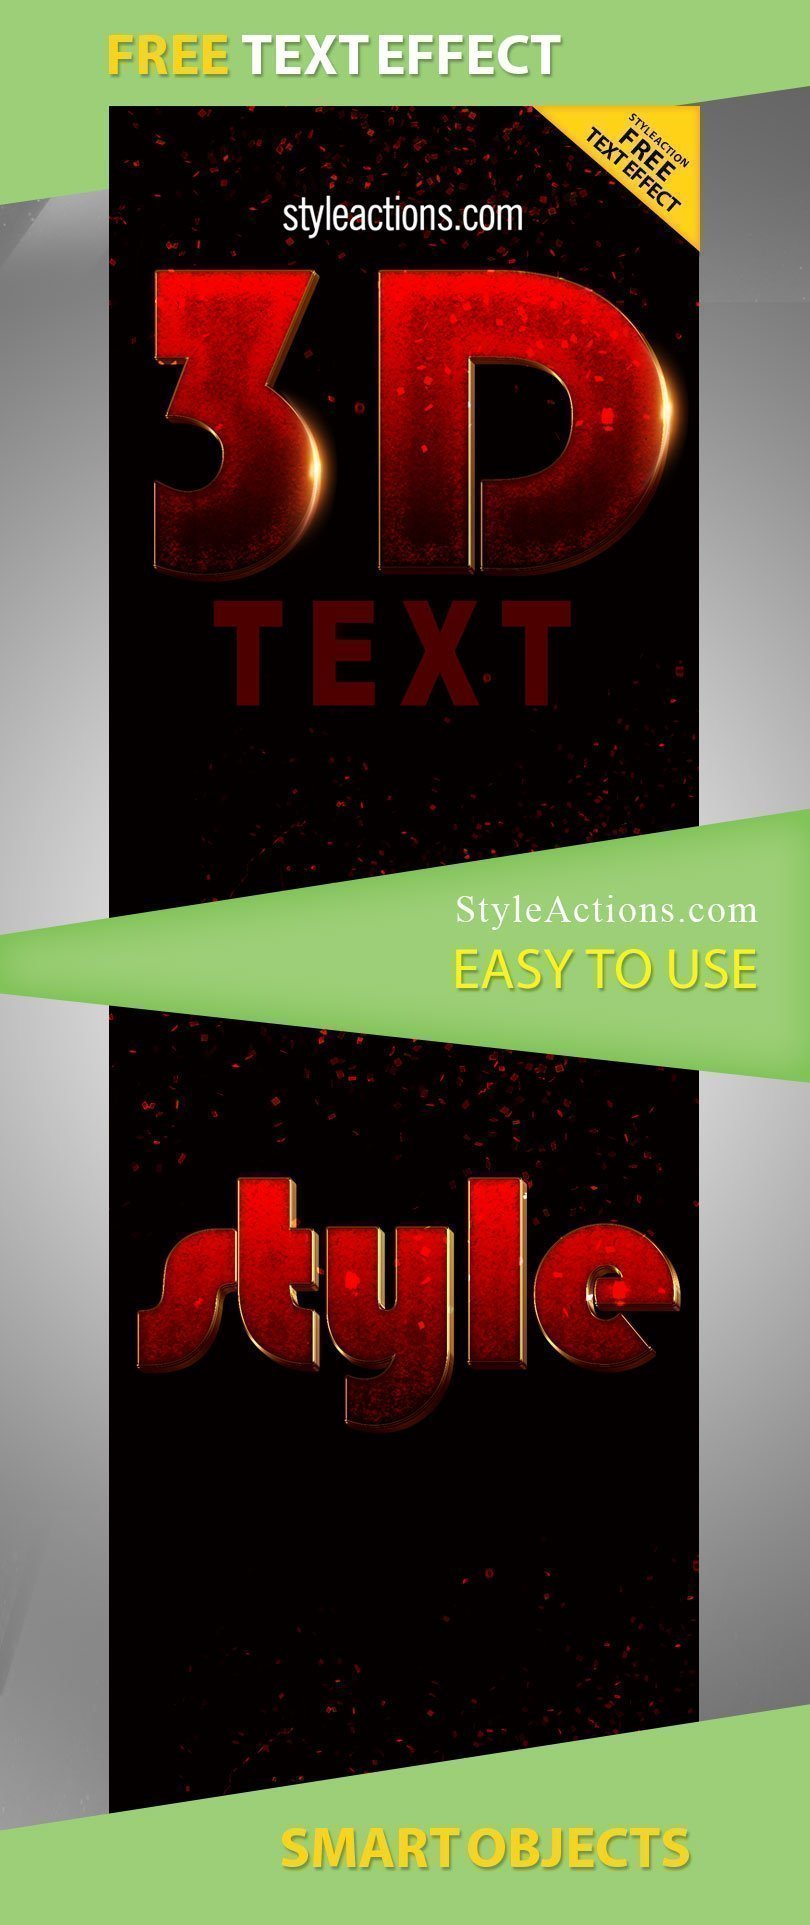 preview_free_text